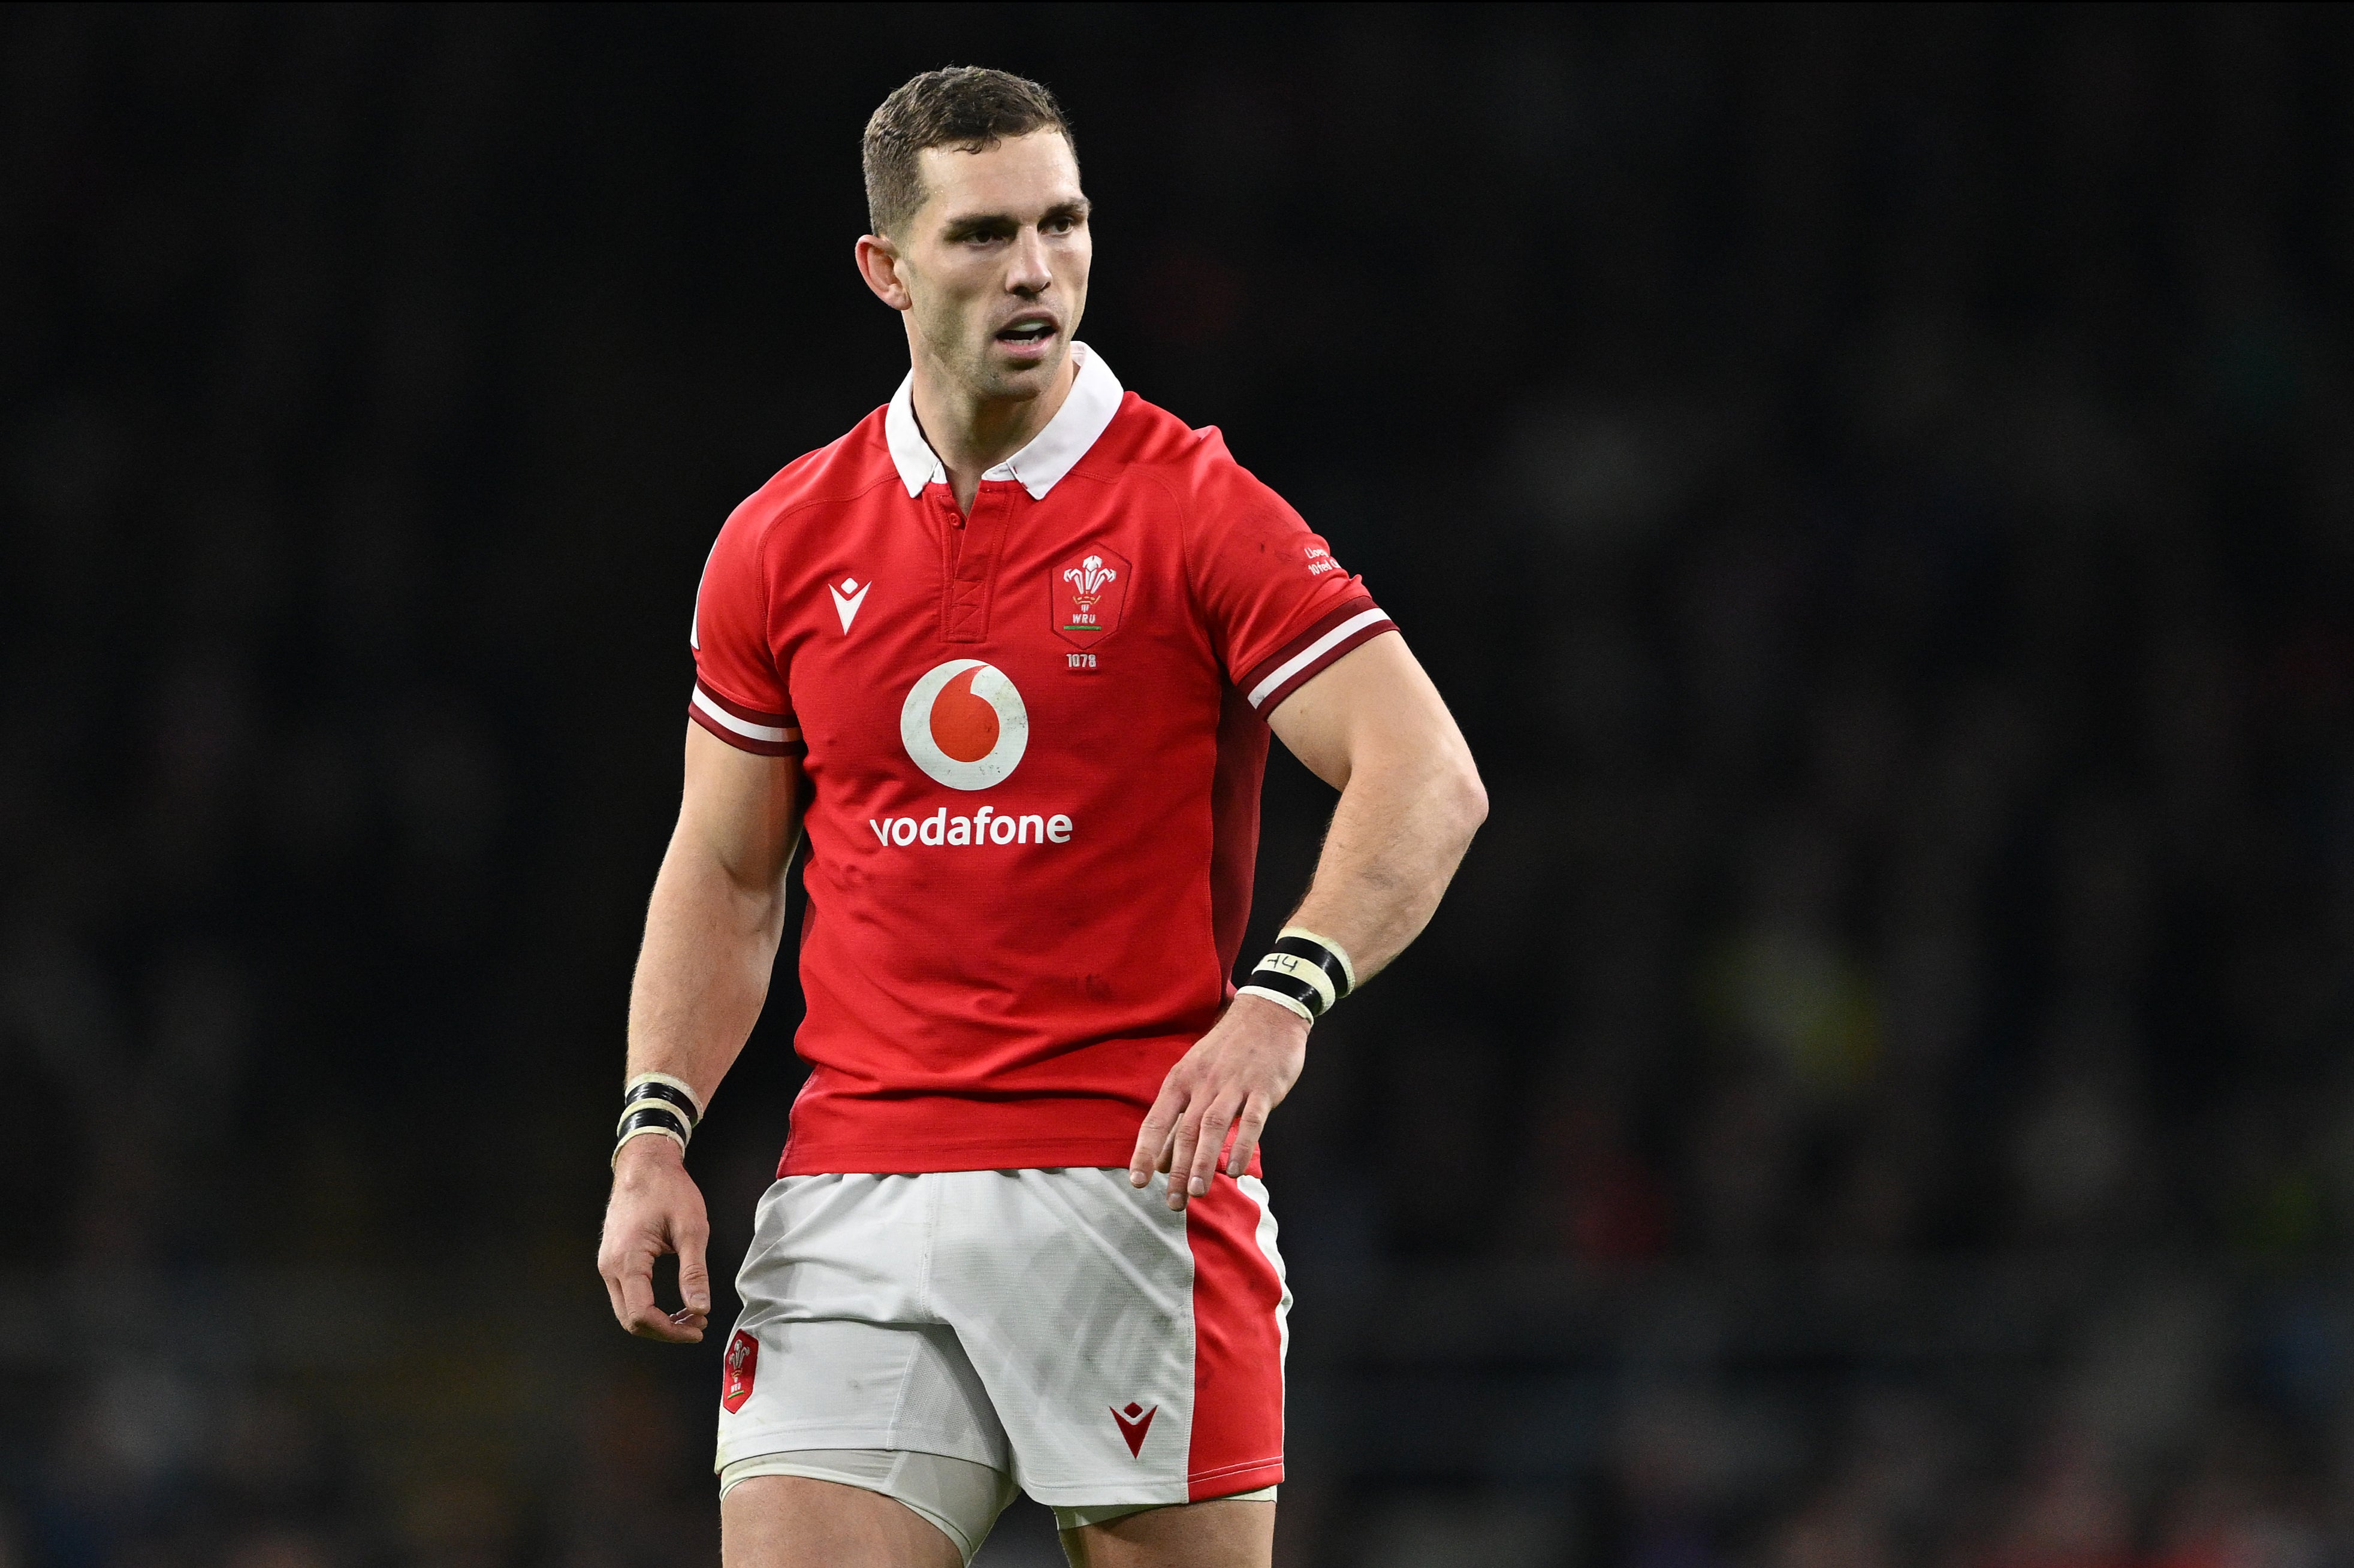 George North will make his final appearance for Wales against Italy on Saturday